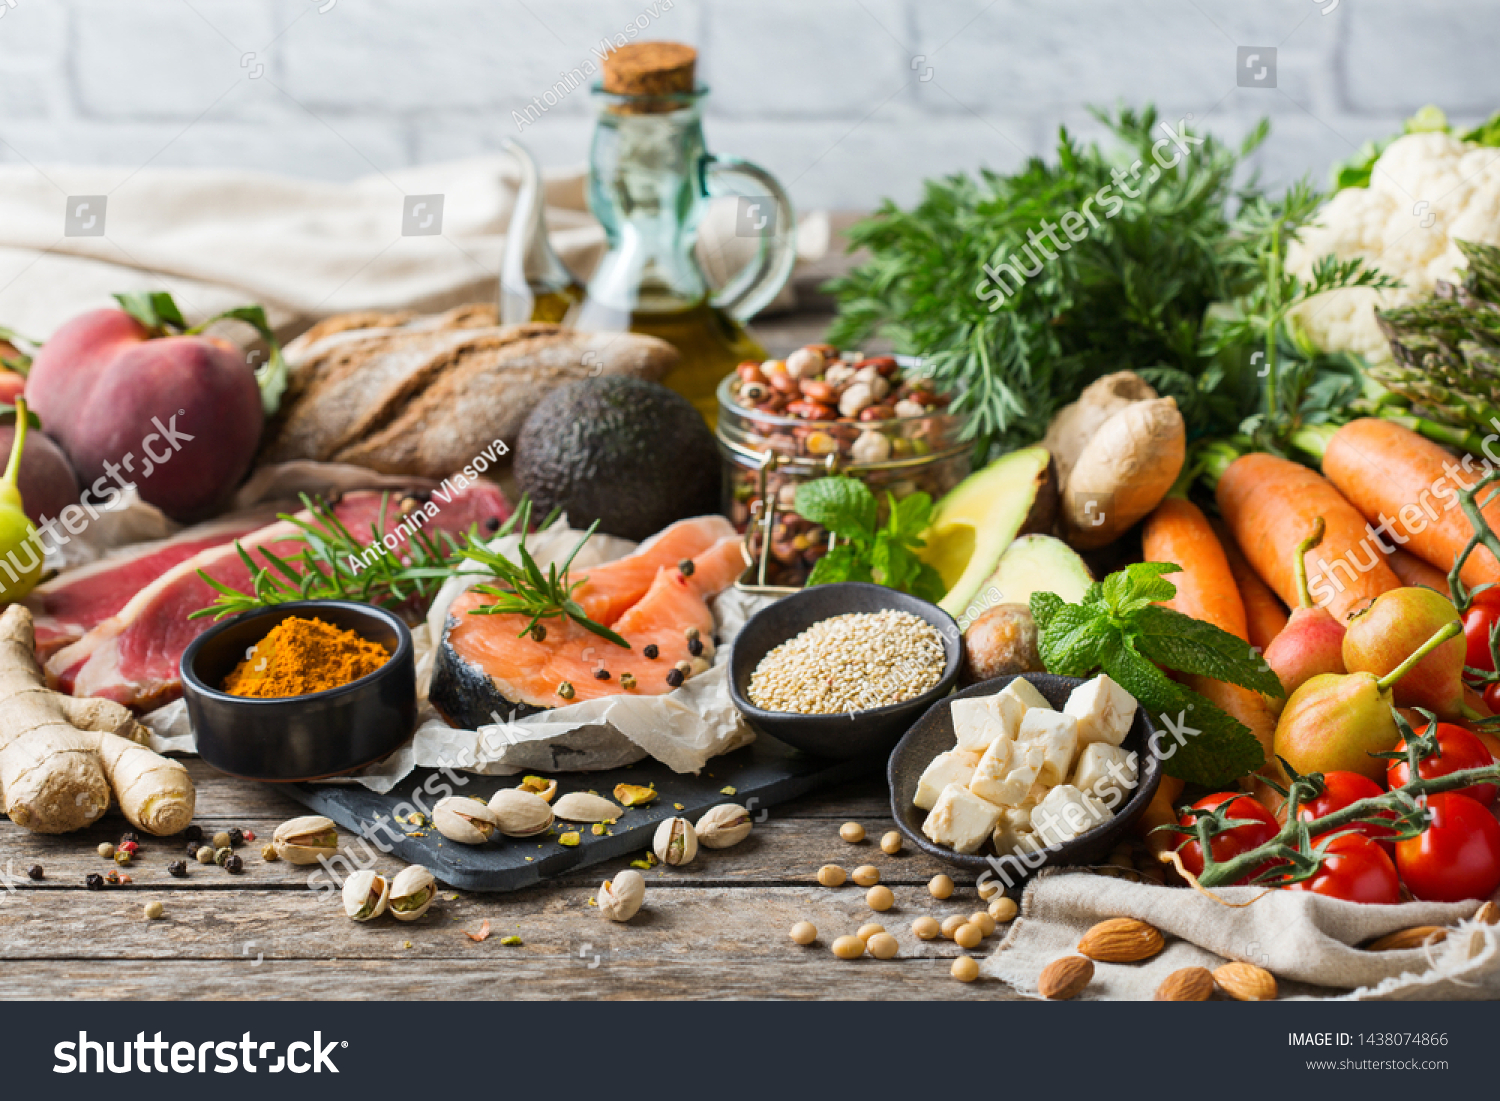 Balanced nutrition concept for clean eating flexitarian mediterranean diet. Assortment of healthy food ingredients for cooking on a wooden kitchen table. #1438074866